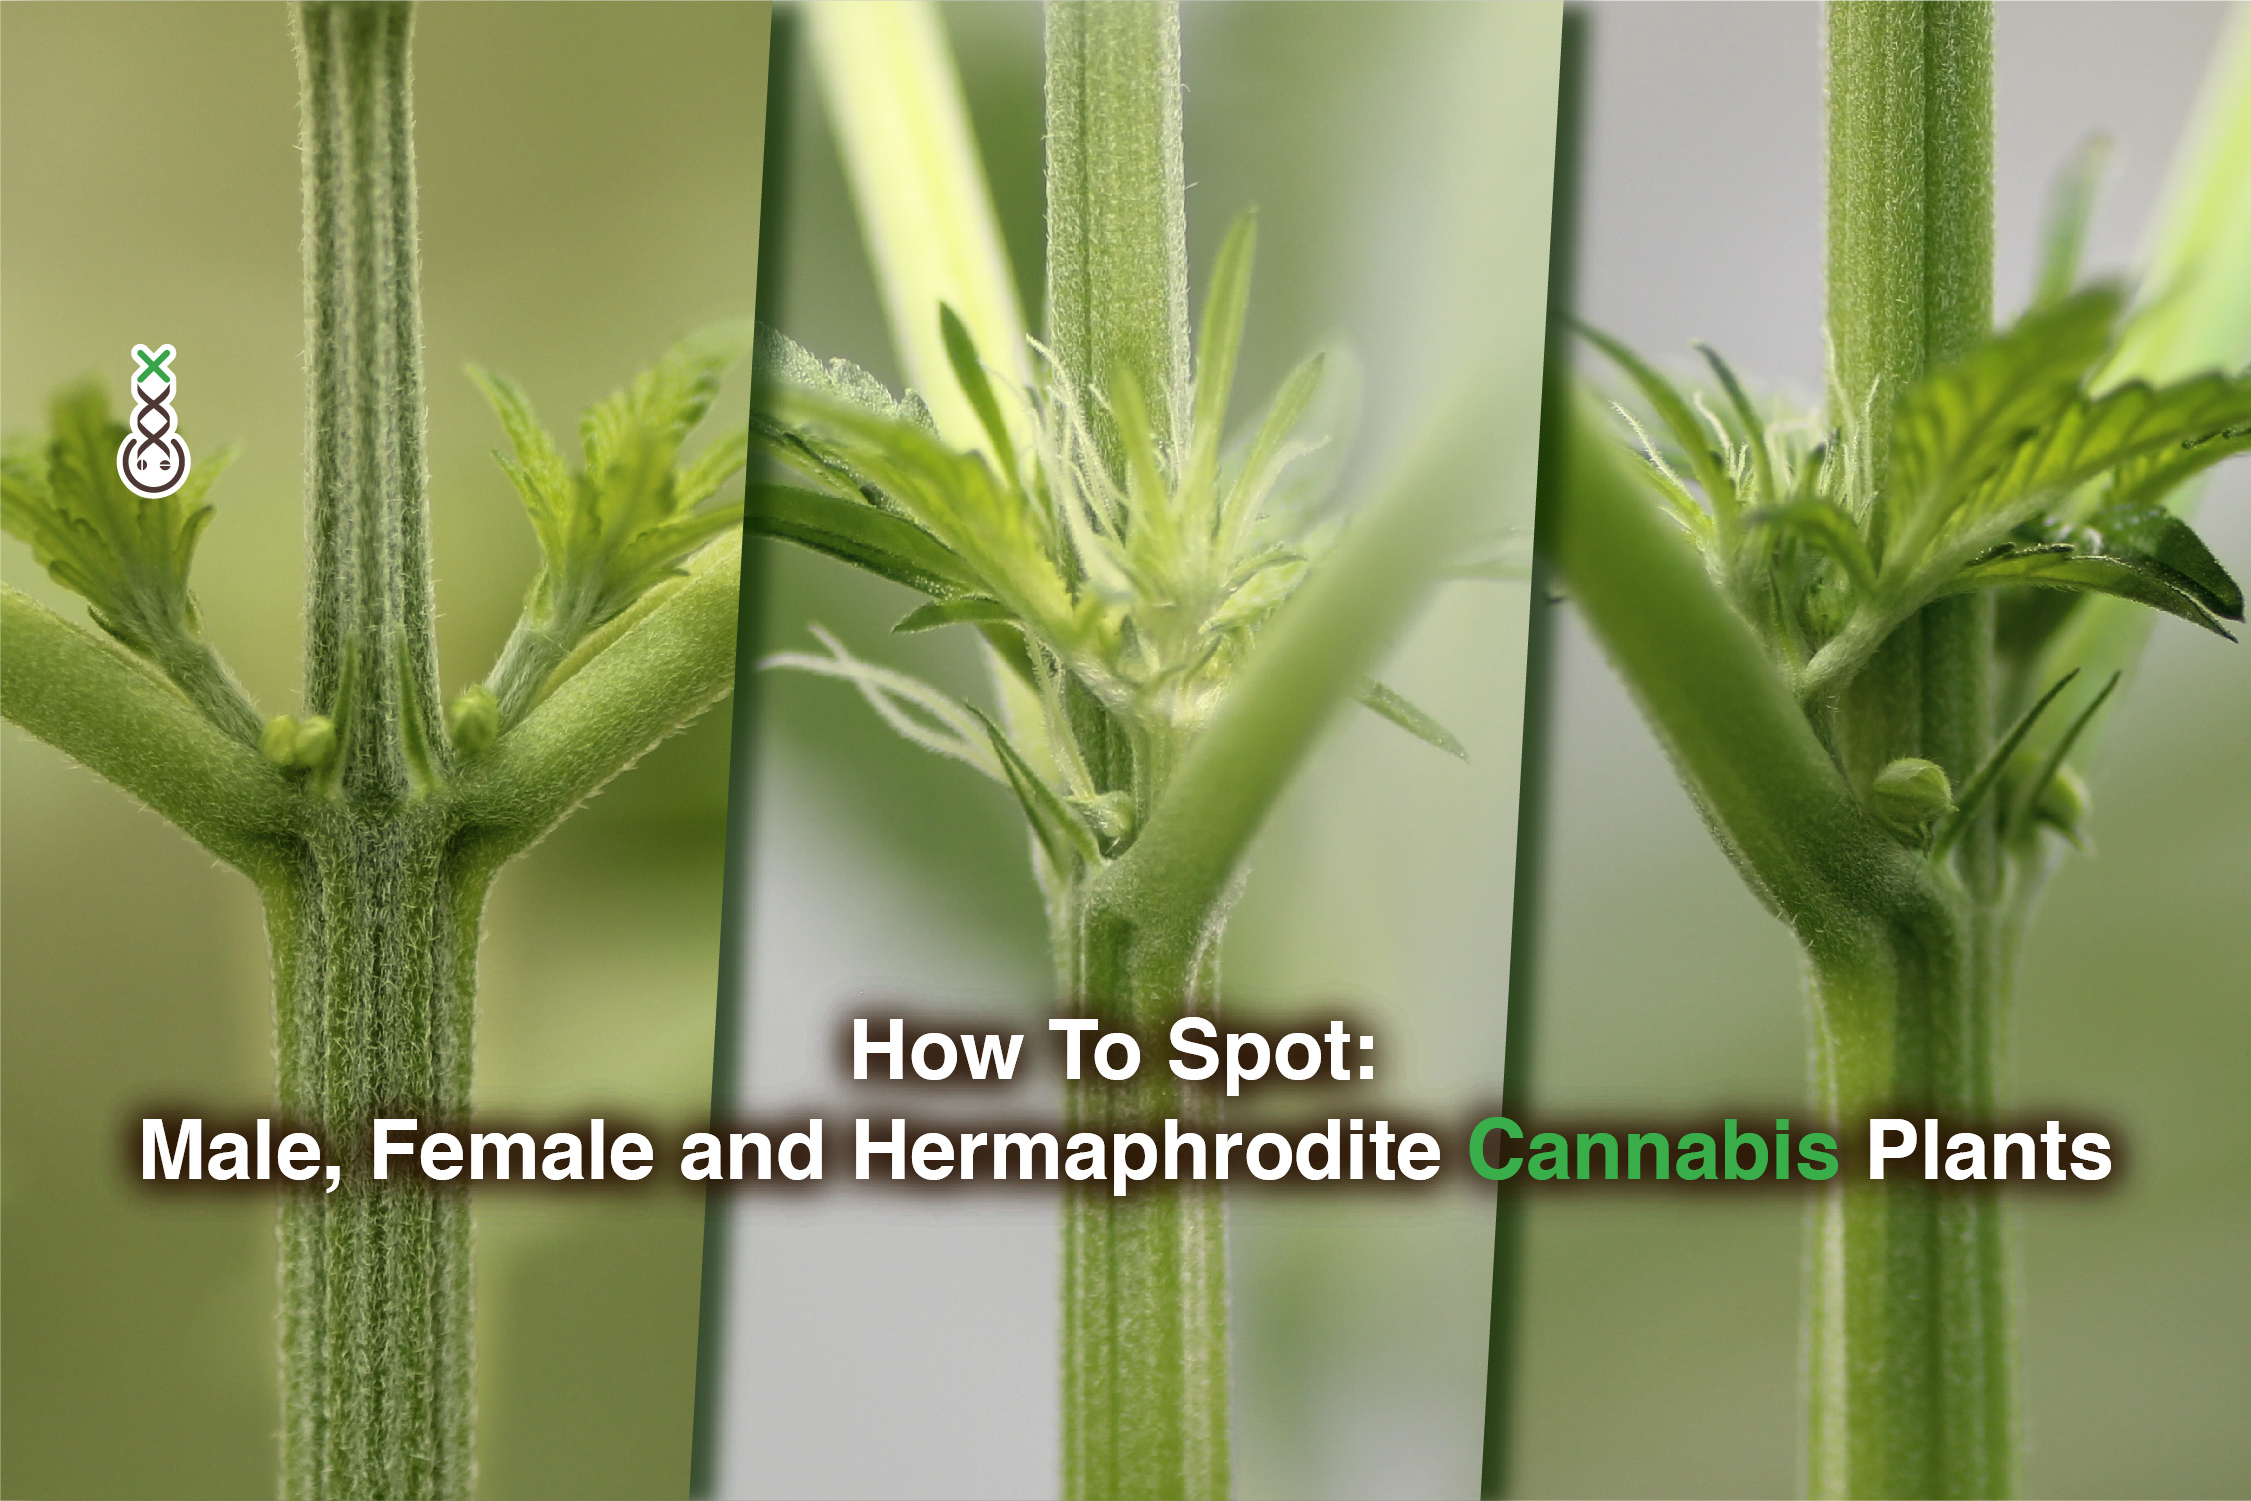 How To Spot: Male, Female and Hermaphrodite Cannabis